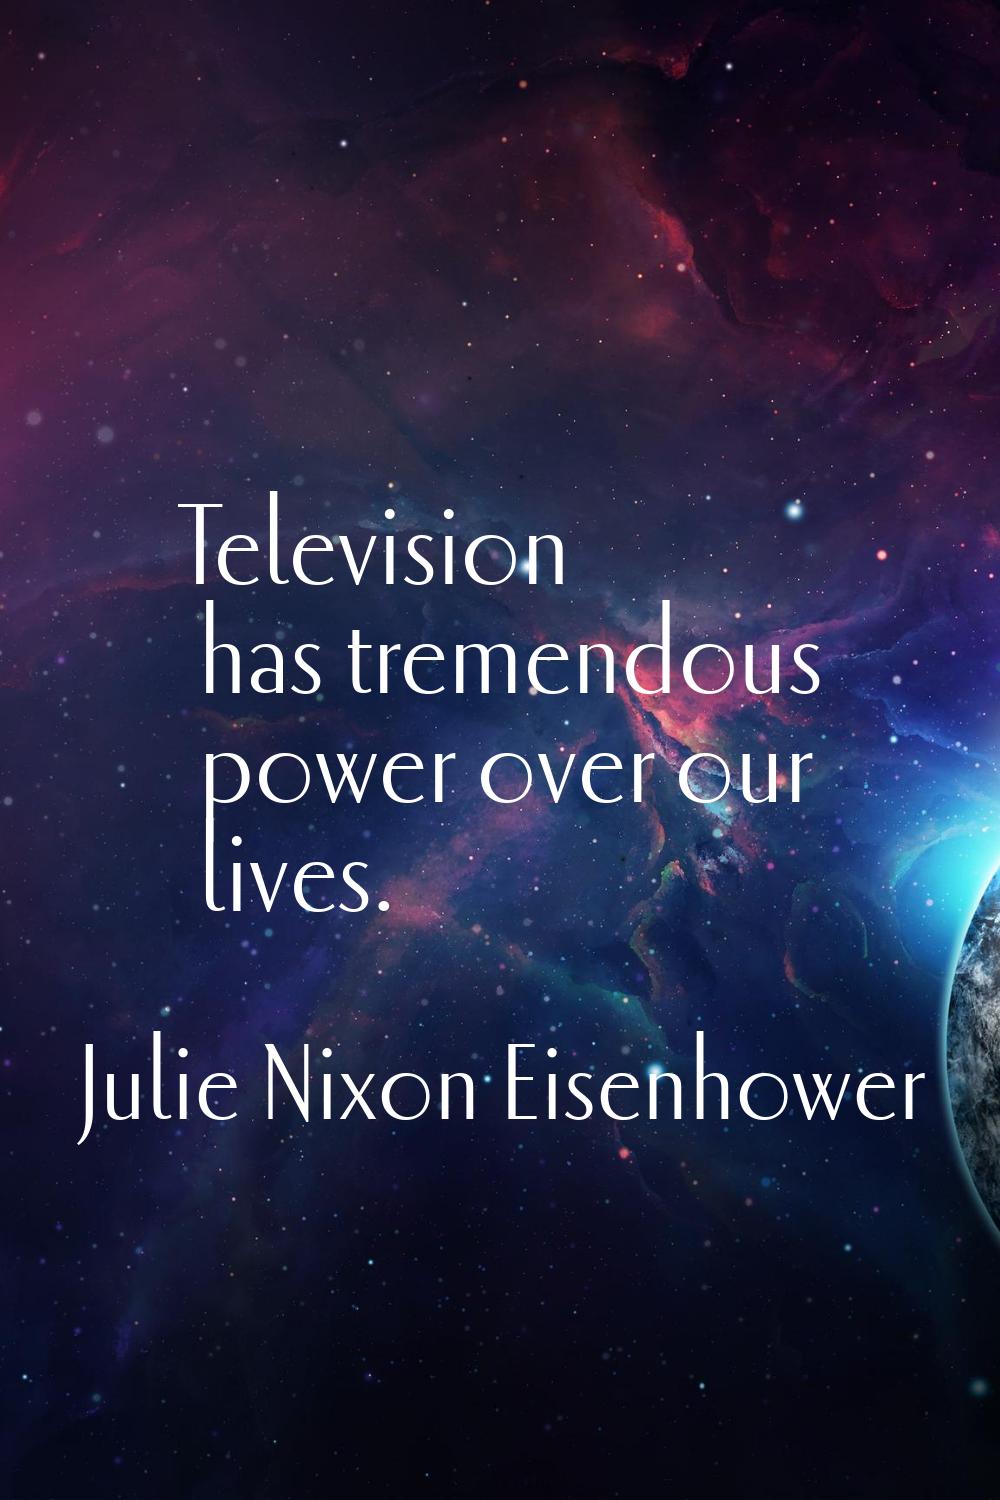 Television has tremendous power over our lives.